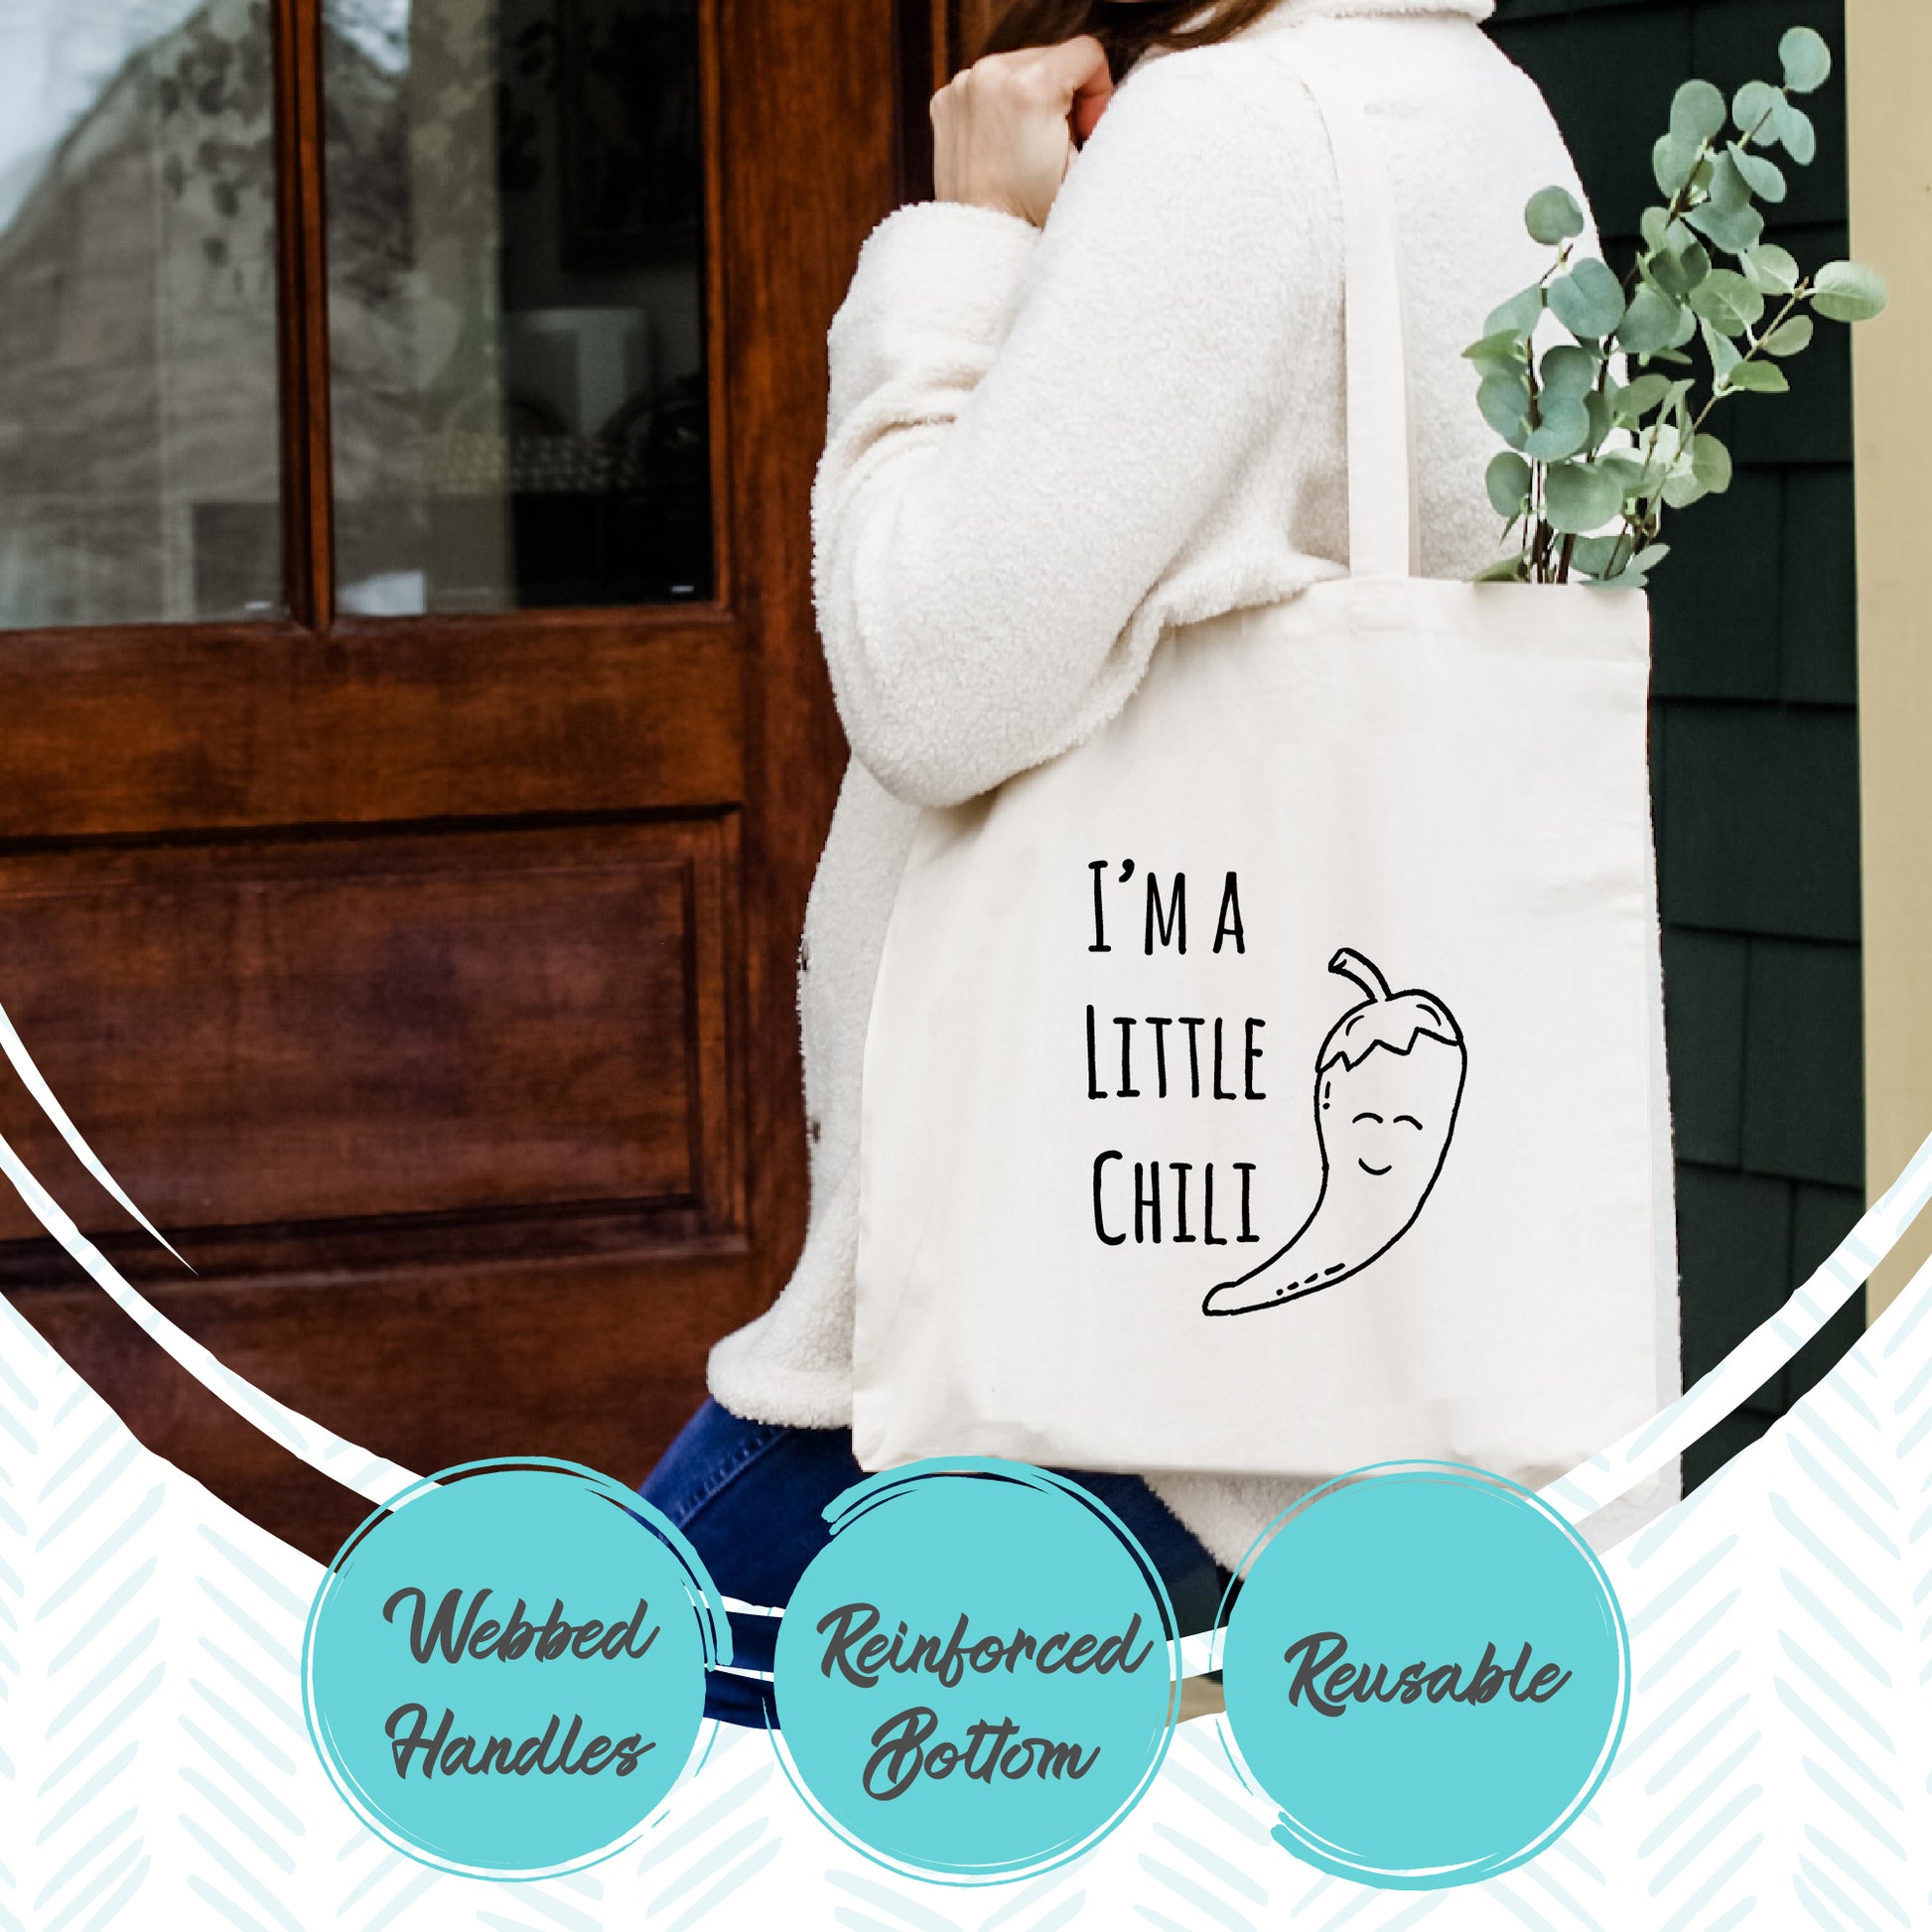 Always Be Yourself Unless You Can Be a Mermaid Then Definitely Be a Mermaid - Tote Bag - MoonlightMakers